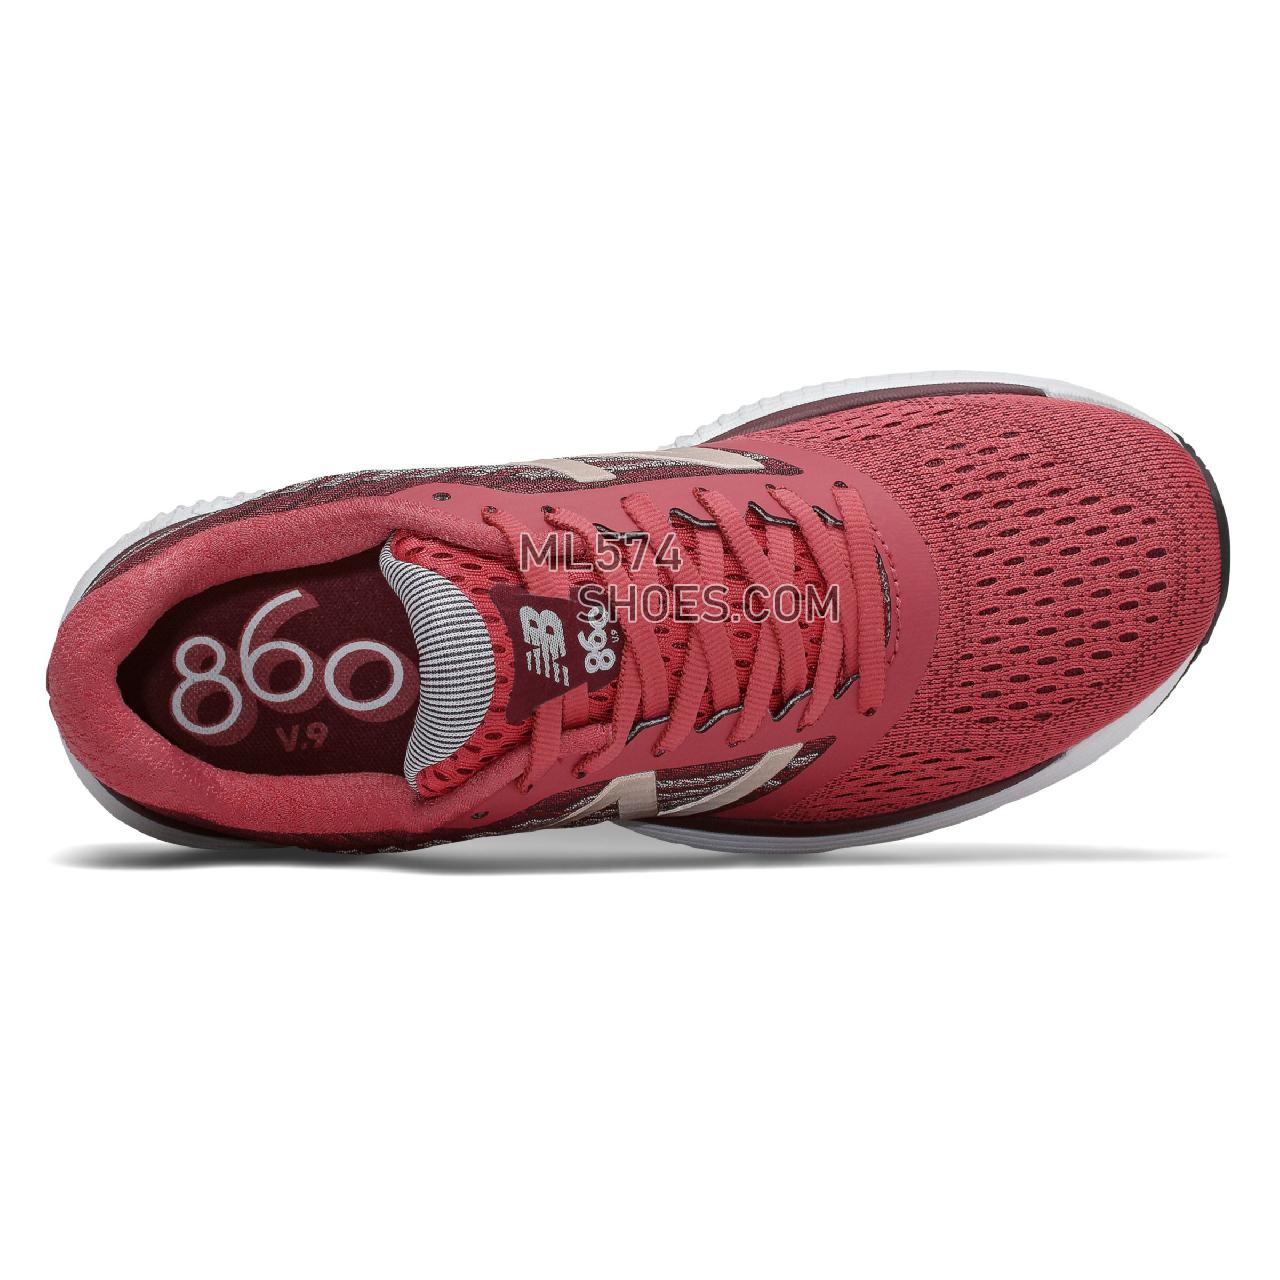 New Balance 860v9 - Women's 860 - Running Earth Red with Burgundy - W860RP9